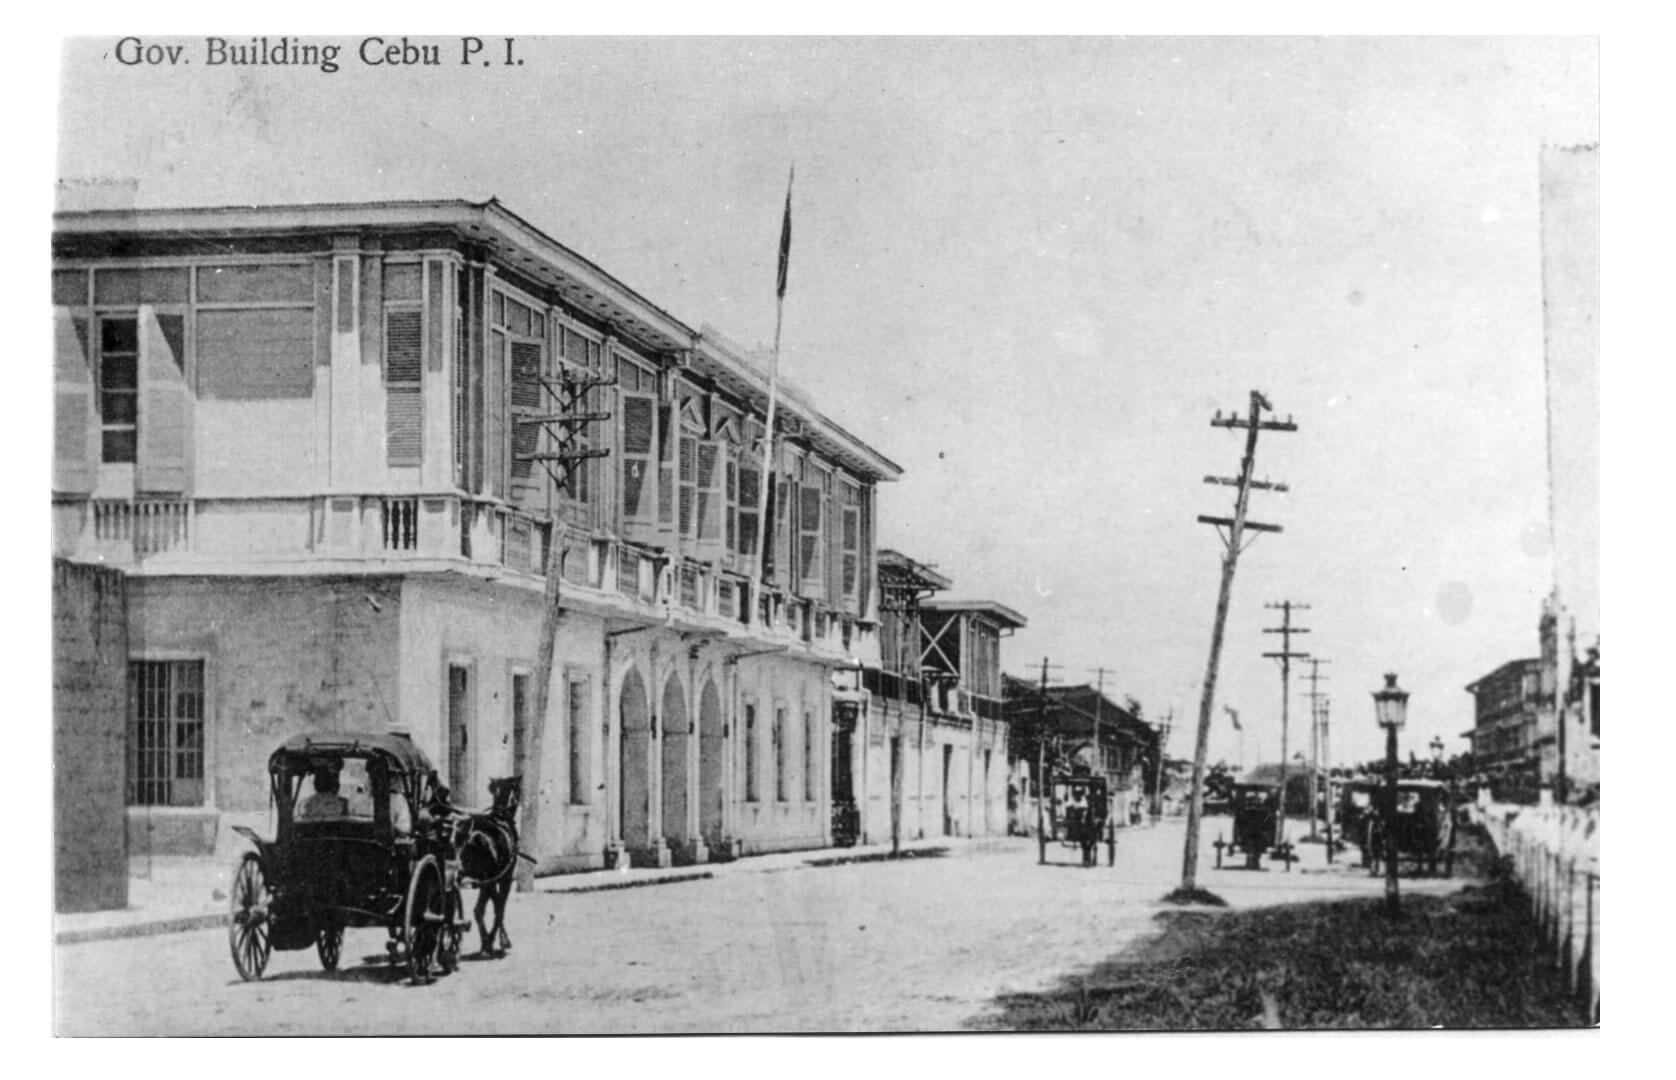 OLD CAPITOL. This photo shows the Casa Provincial where Cebu’s governors and other provincial officers held office. It was located on what was then known as Calle de los Trece Martires, now M. J. Cuenco Avenue. According to the photo file, you can see at the far end the Colegio Parvulos del Santo Niño Jesus. (Photo from the Medalle Collection and used with permission of the Cebuano Studies Center of the University of San Carlos.)